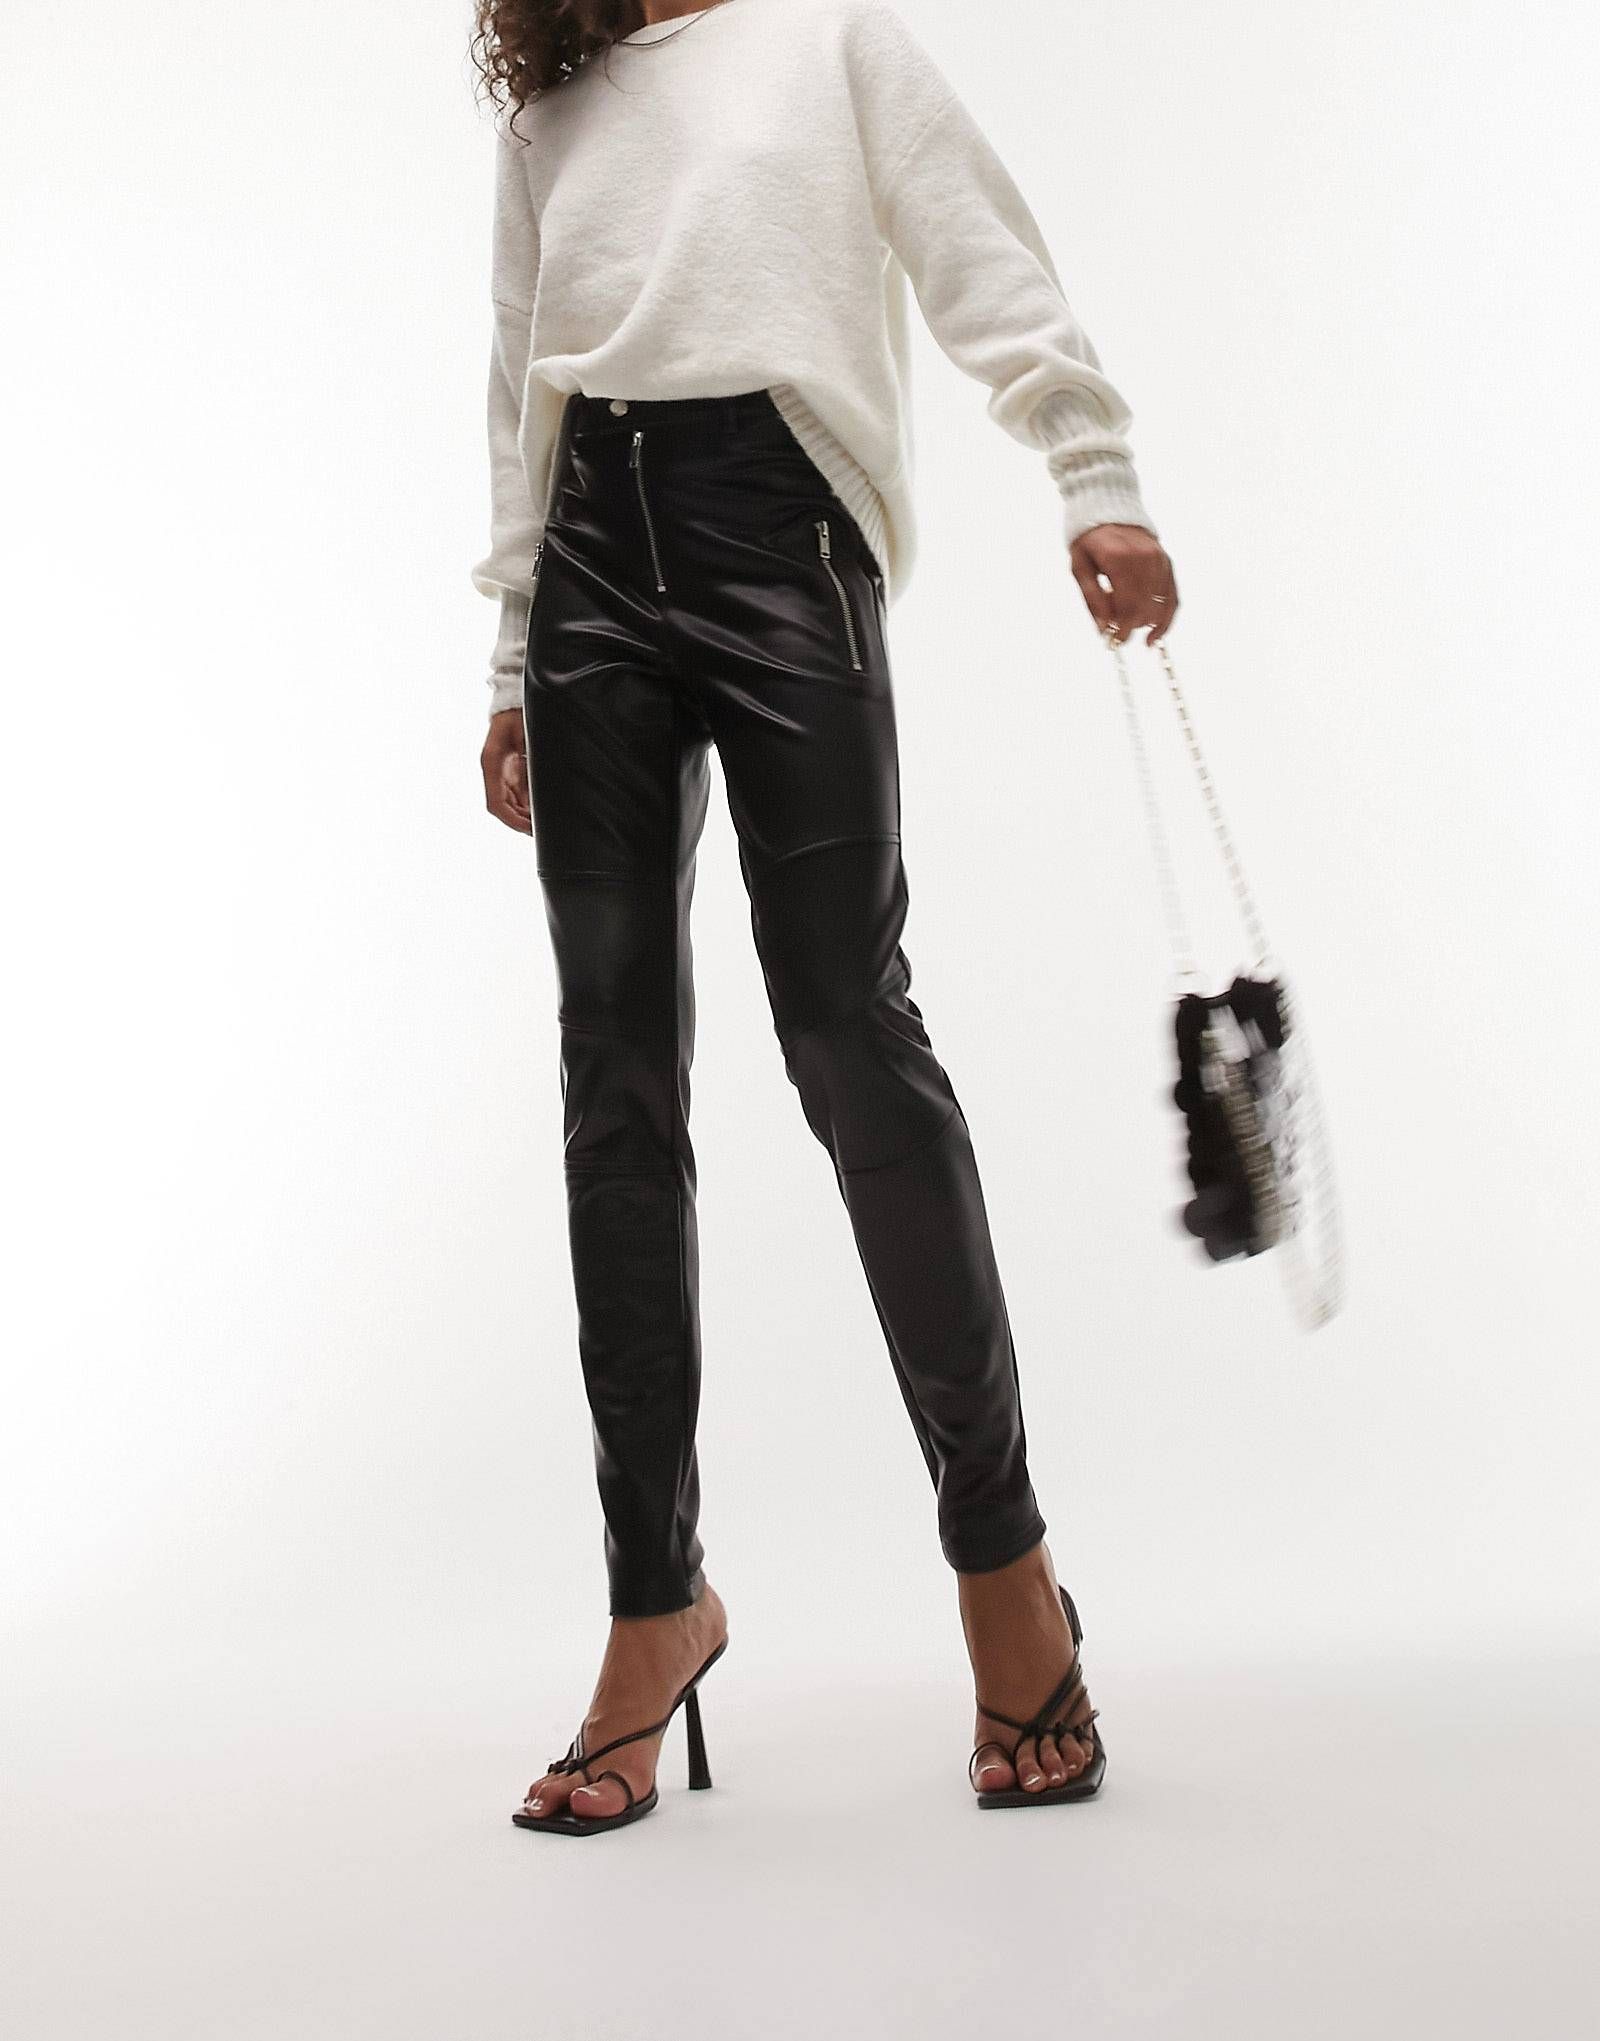 How to wear the leather trousers  and style them well at any age